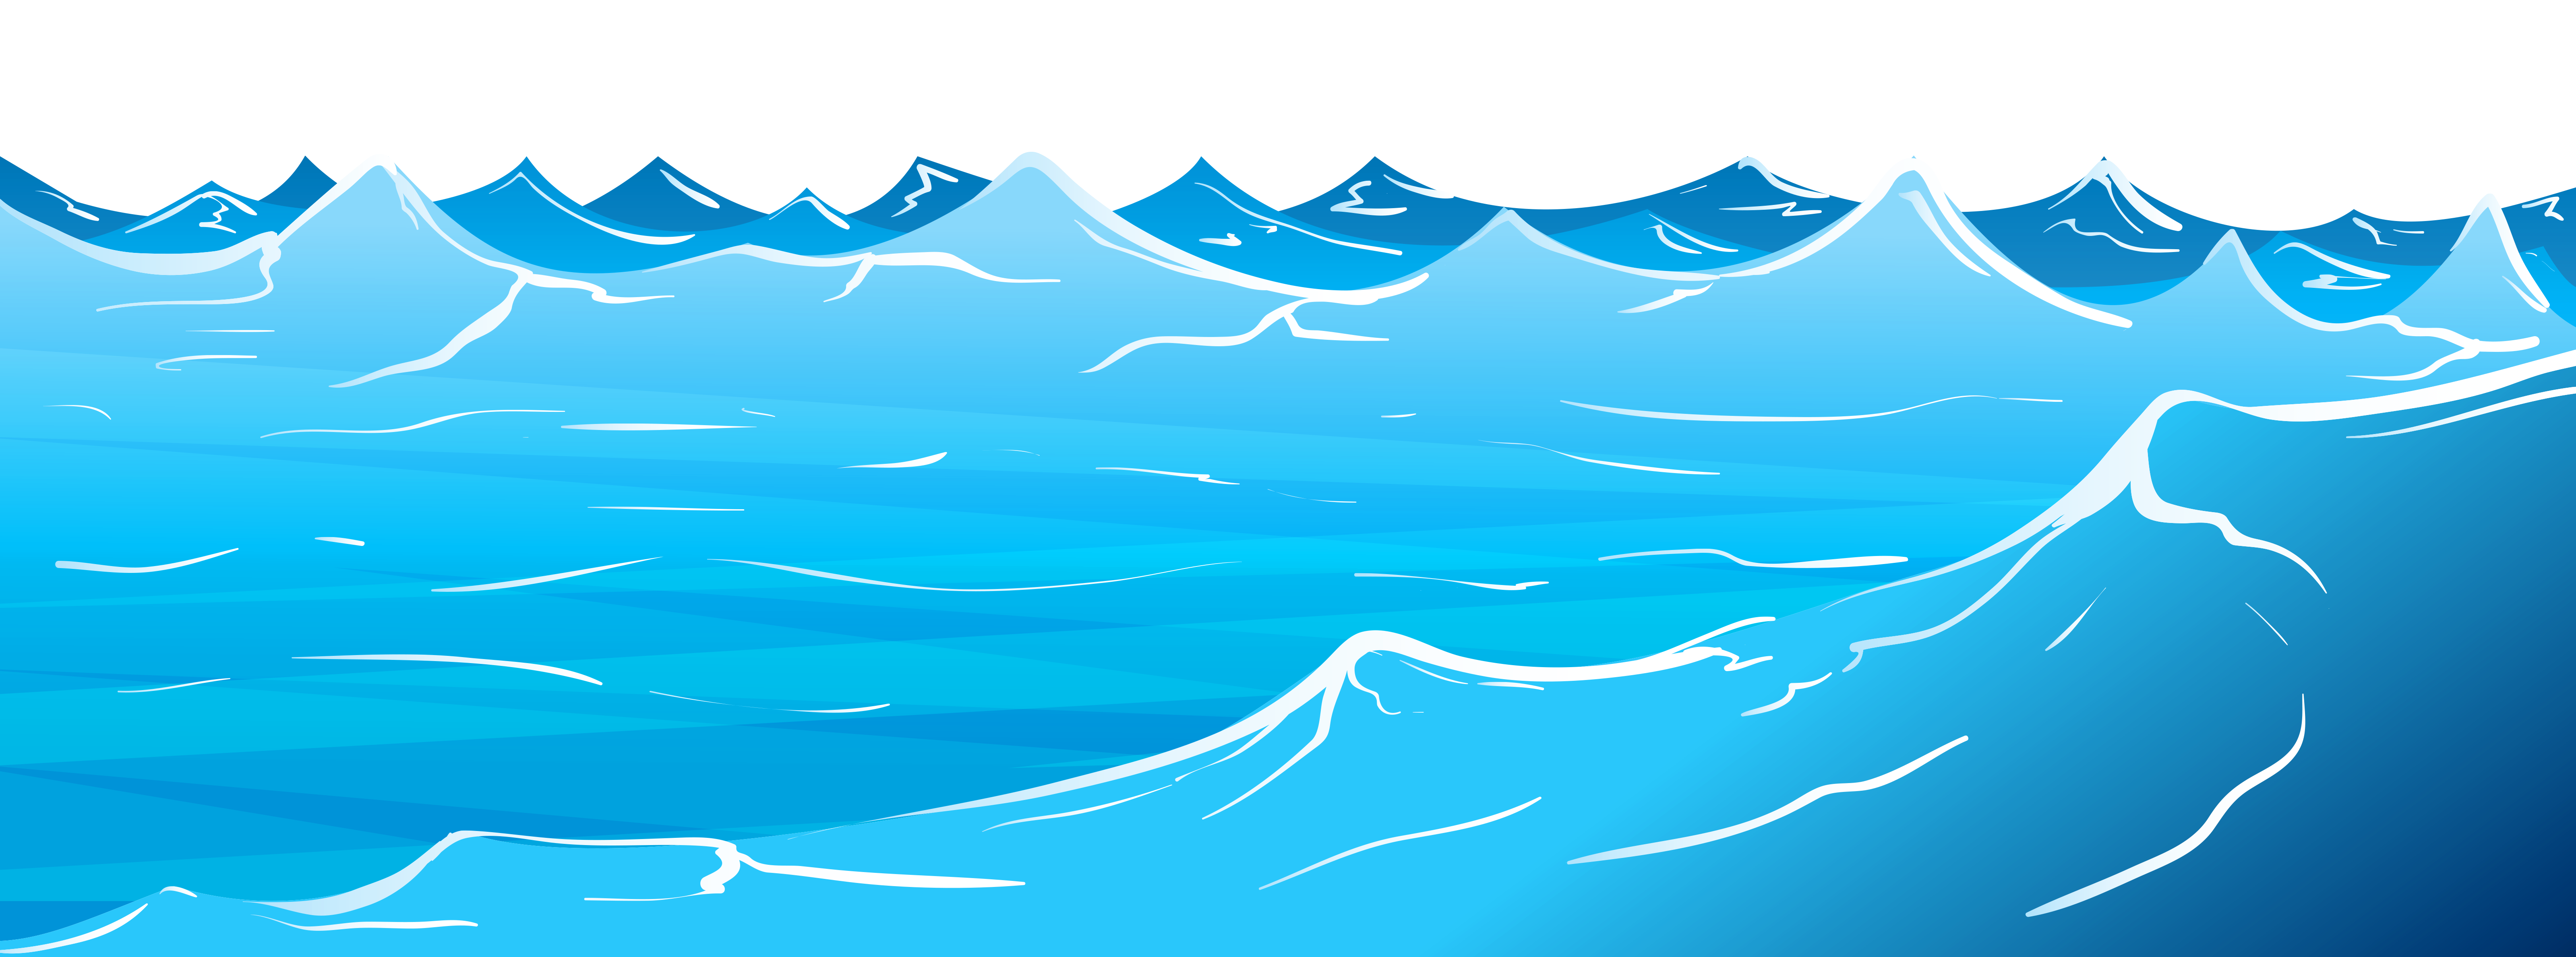 water background clipart - photo #28